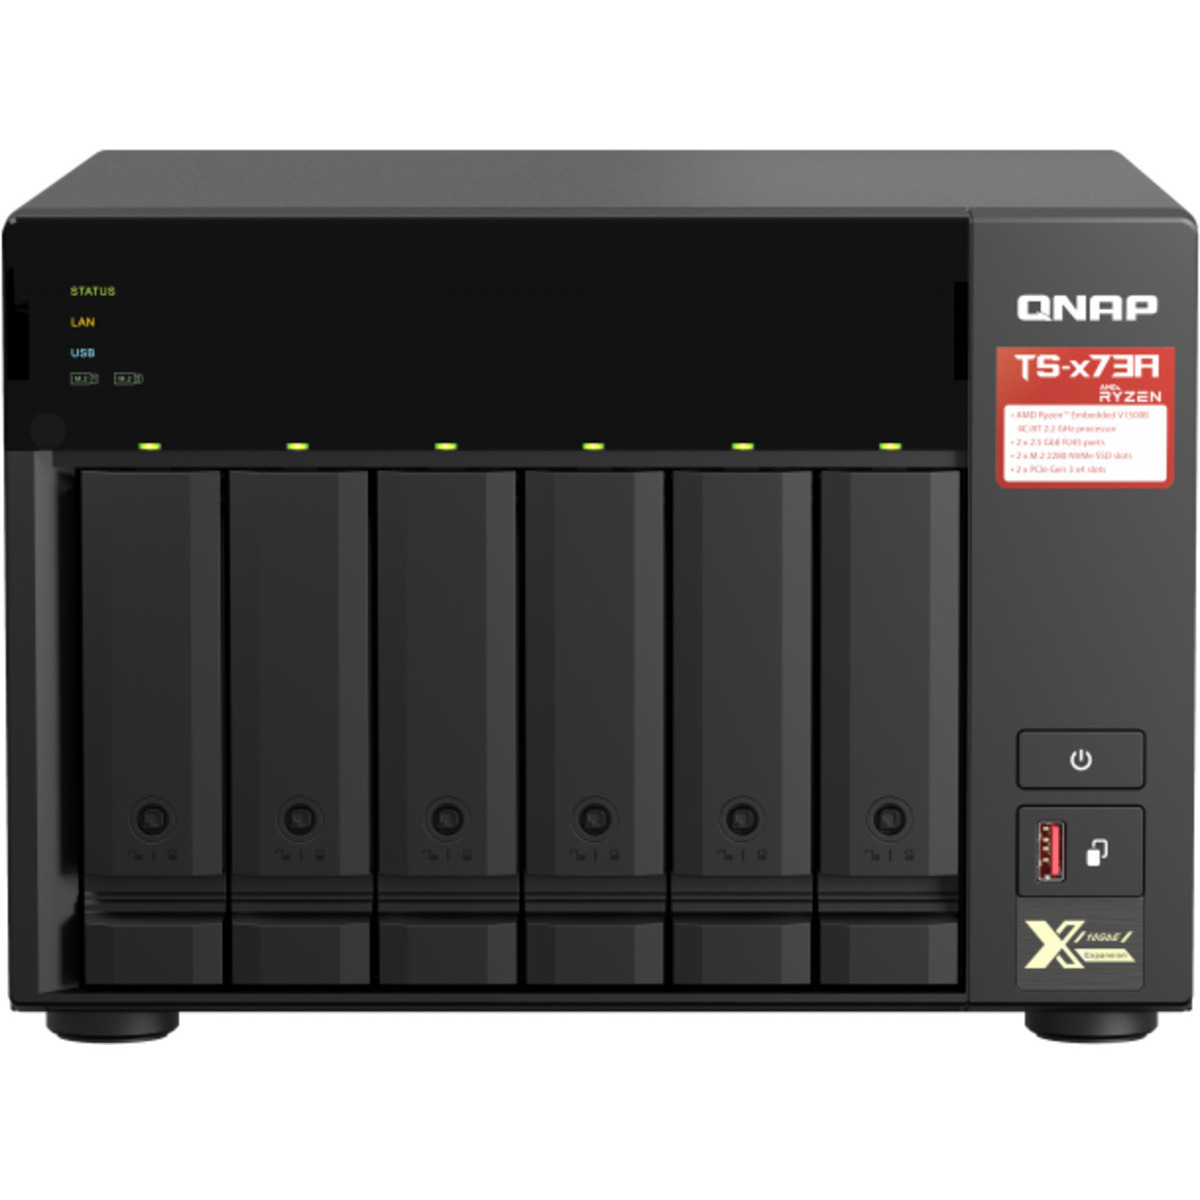 QNAP TS-673A 72tb 6-Bay Desktop Multimedia / Power User / Business NAS - Network Attached Storage Device 6x12tb Seagate EXOS X18 ST12000NM000J 3.5 7200rpm SATA 6Gb/s HDD ENTERPRISE Class Drives Installed - Burn-In Tested TS-673A